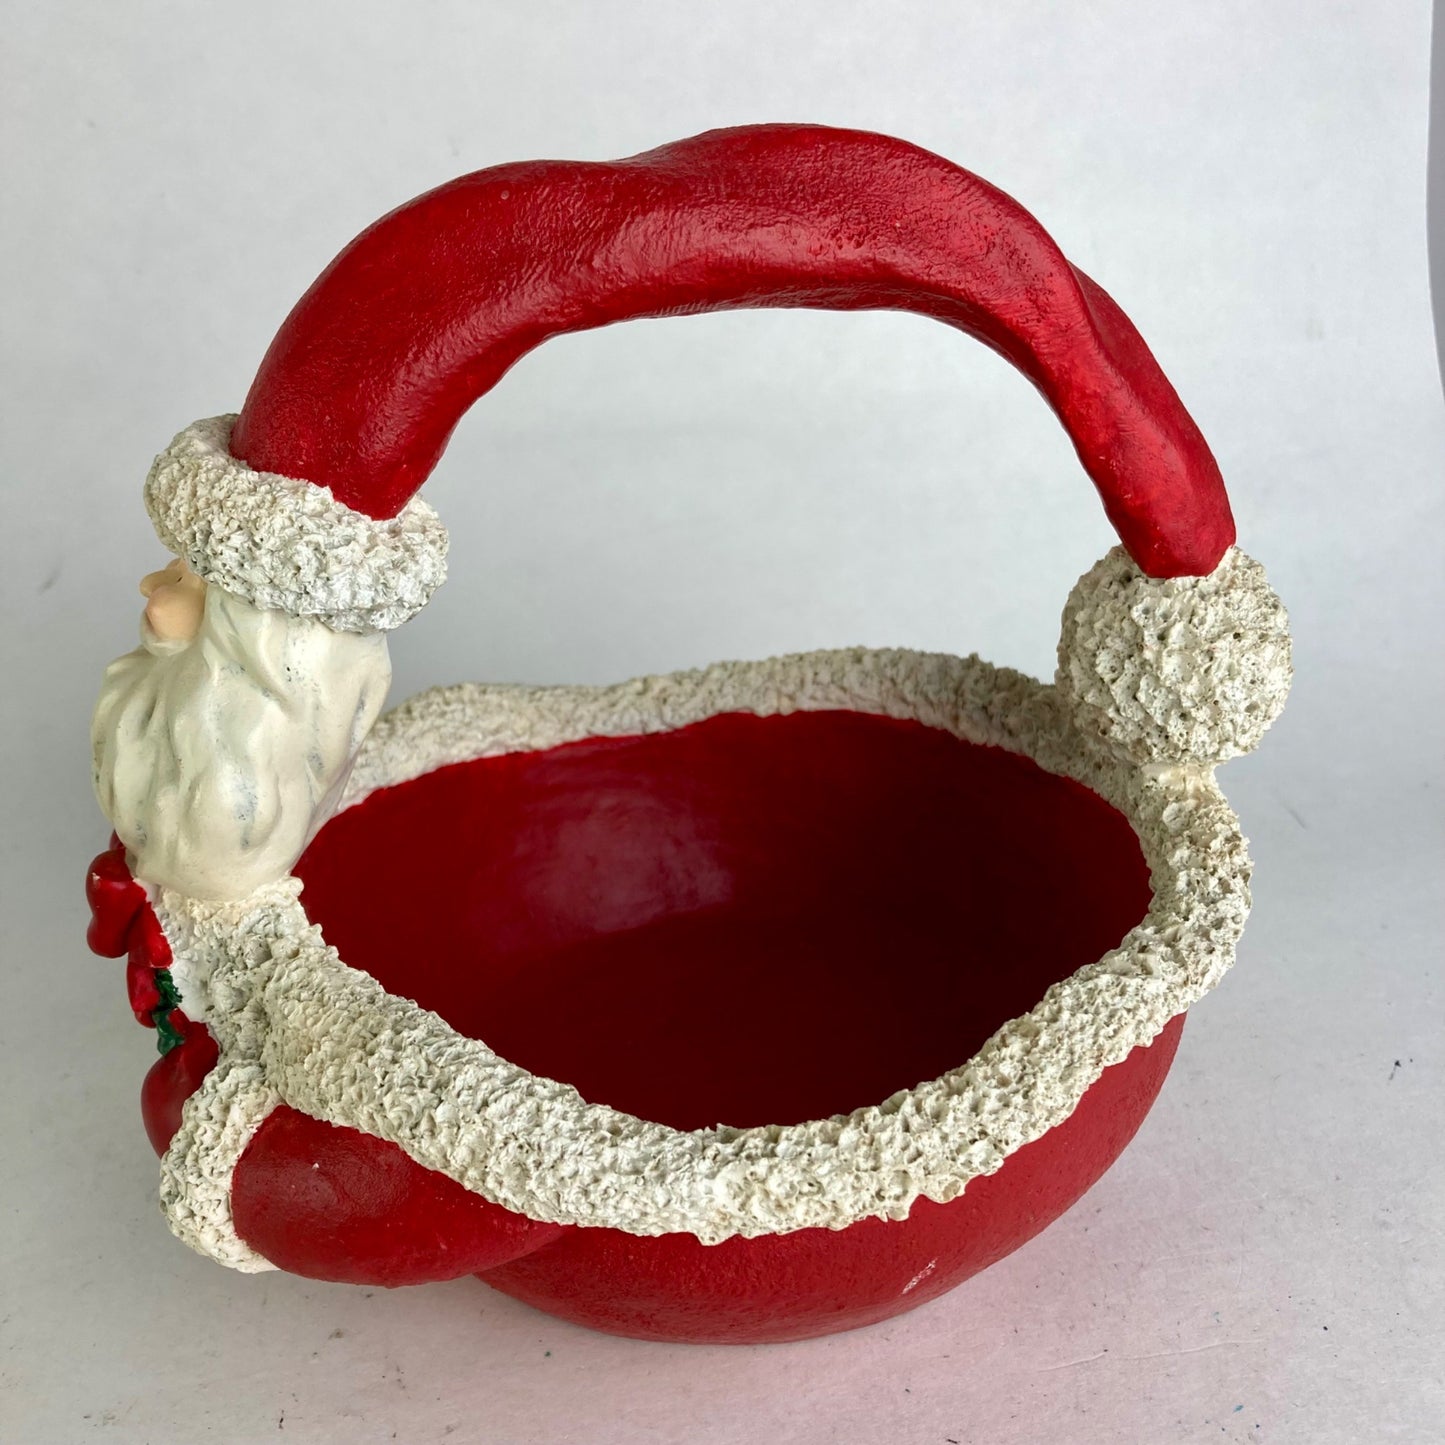 Department 56 Resin Santa Claus Candy Dish Christmas Nut Holder NICE!